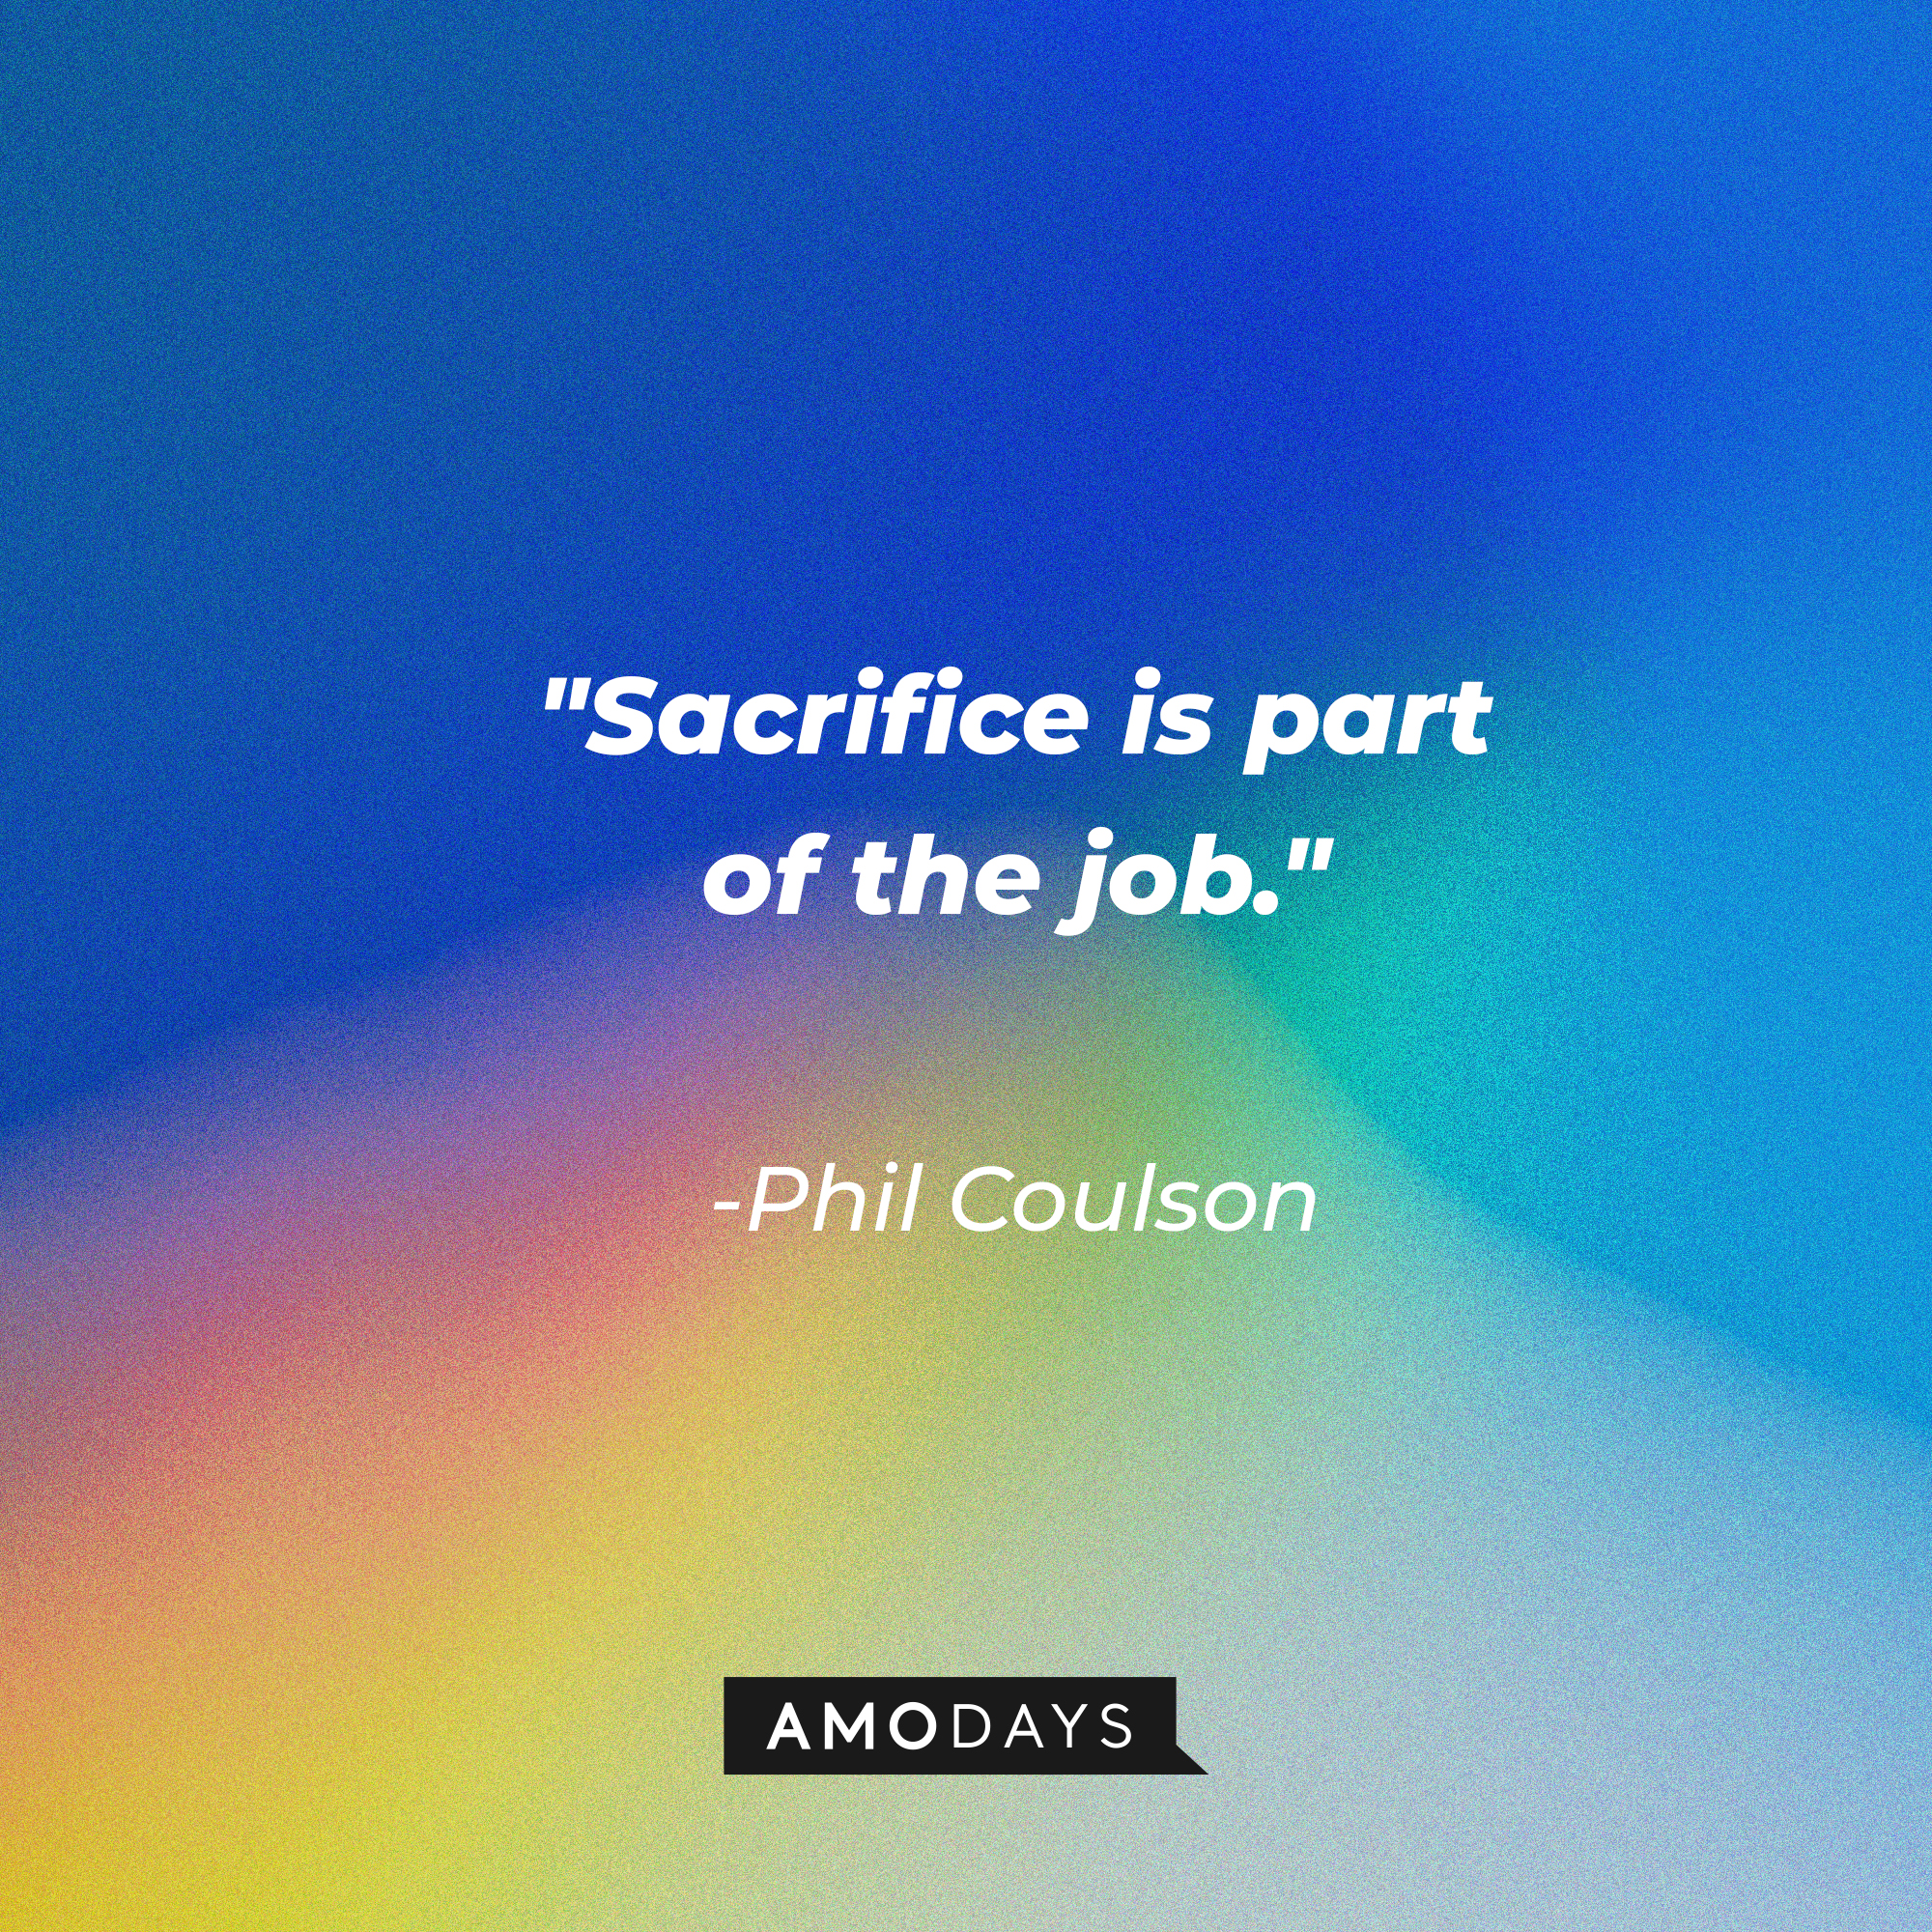 Phil Coulson's quote: "Sacrifice is part of the job." | Source: Amodays